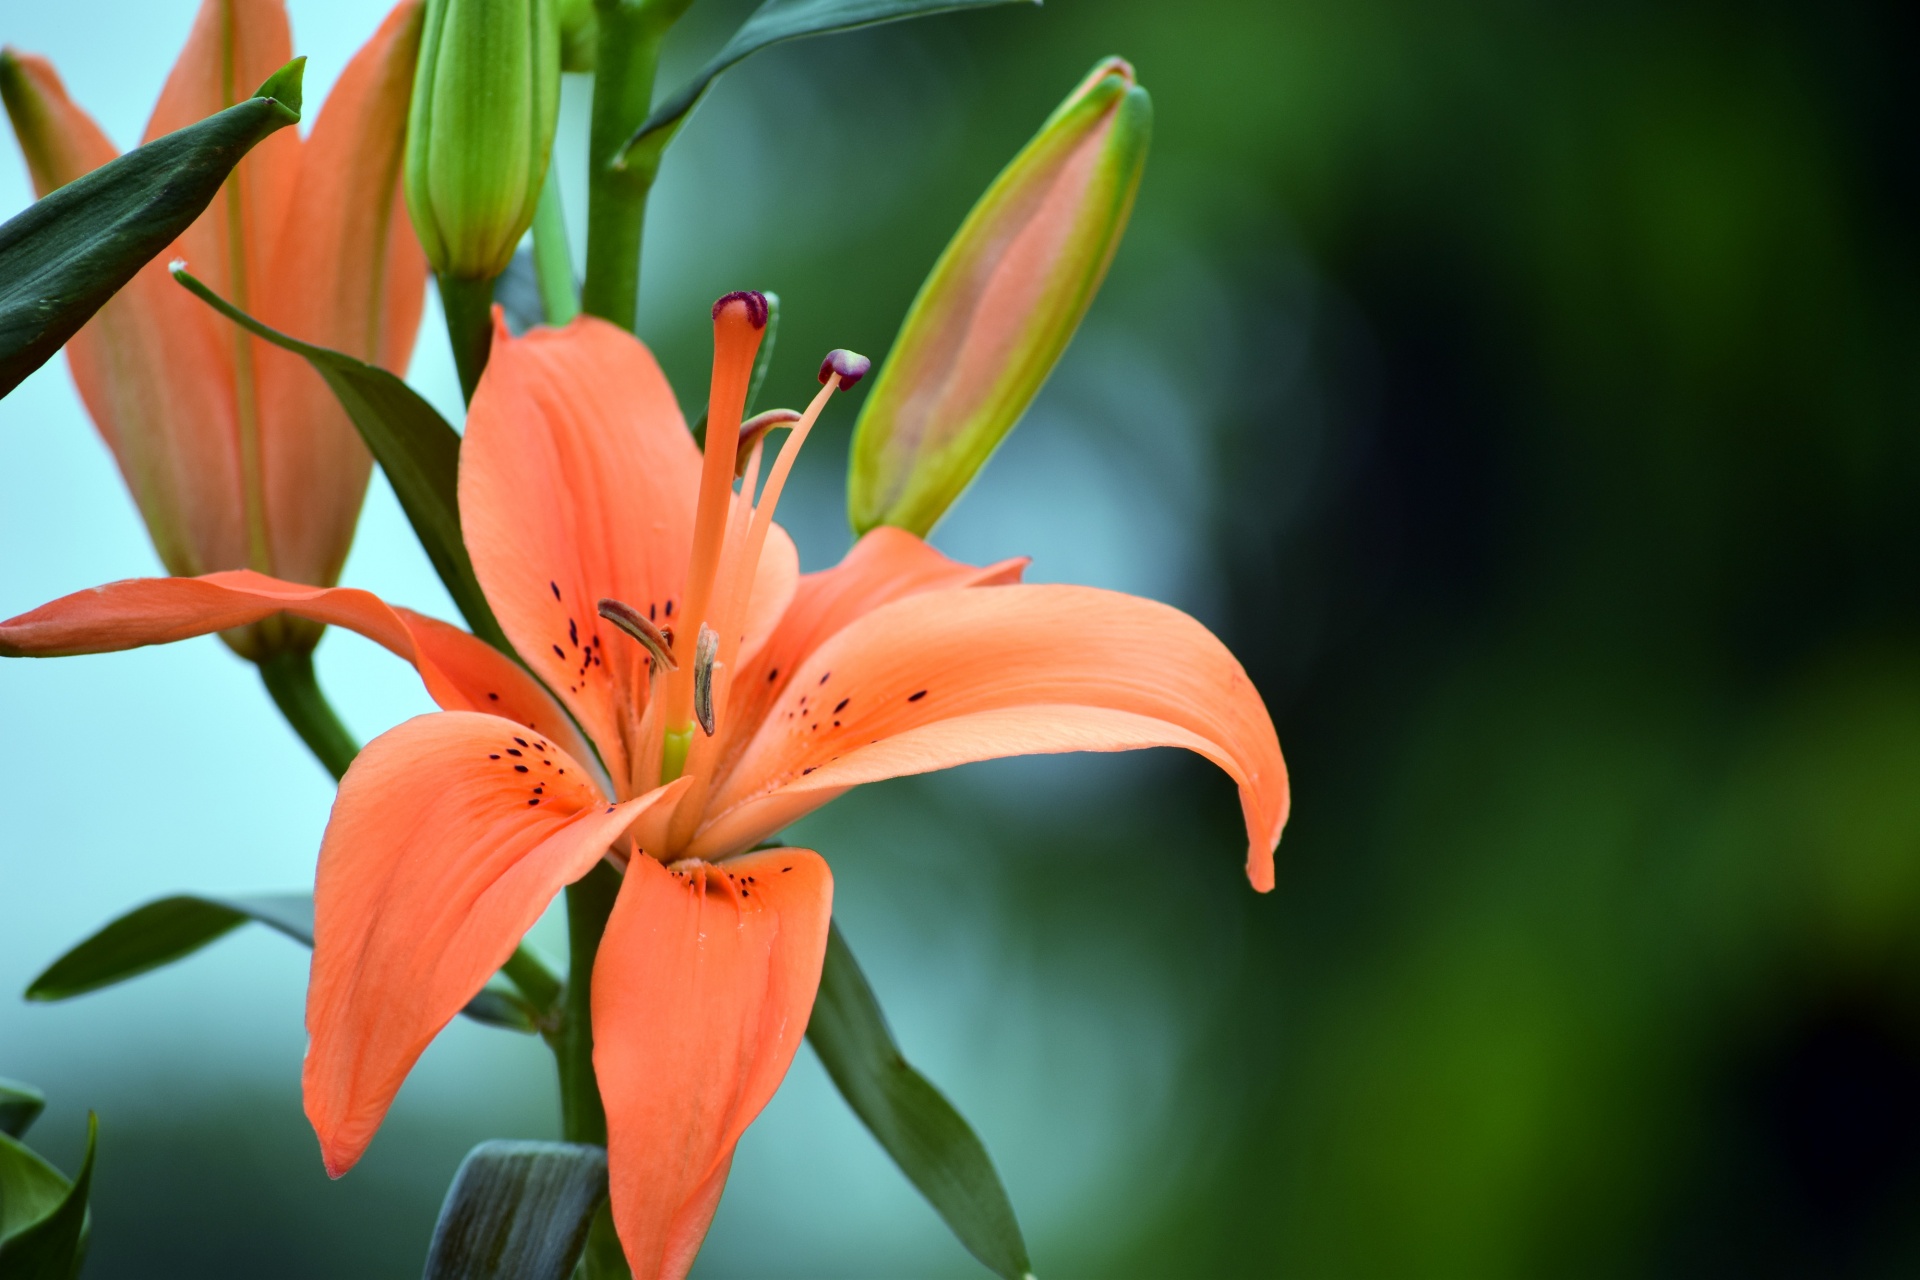 lily flower nature free photo